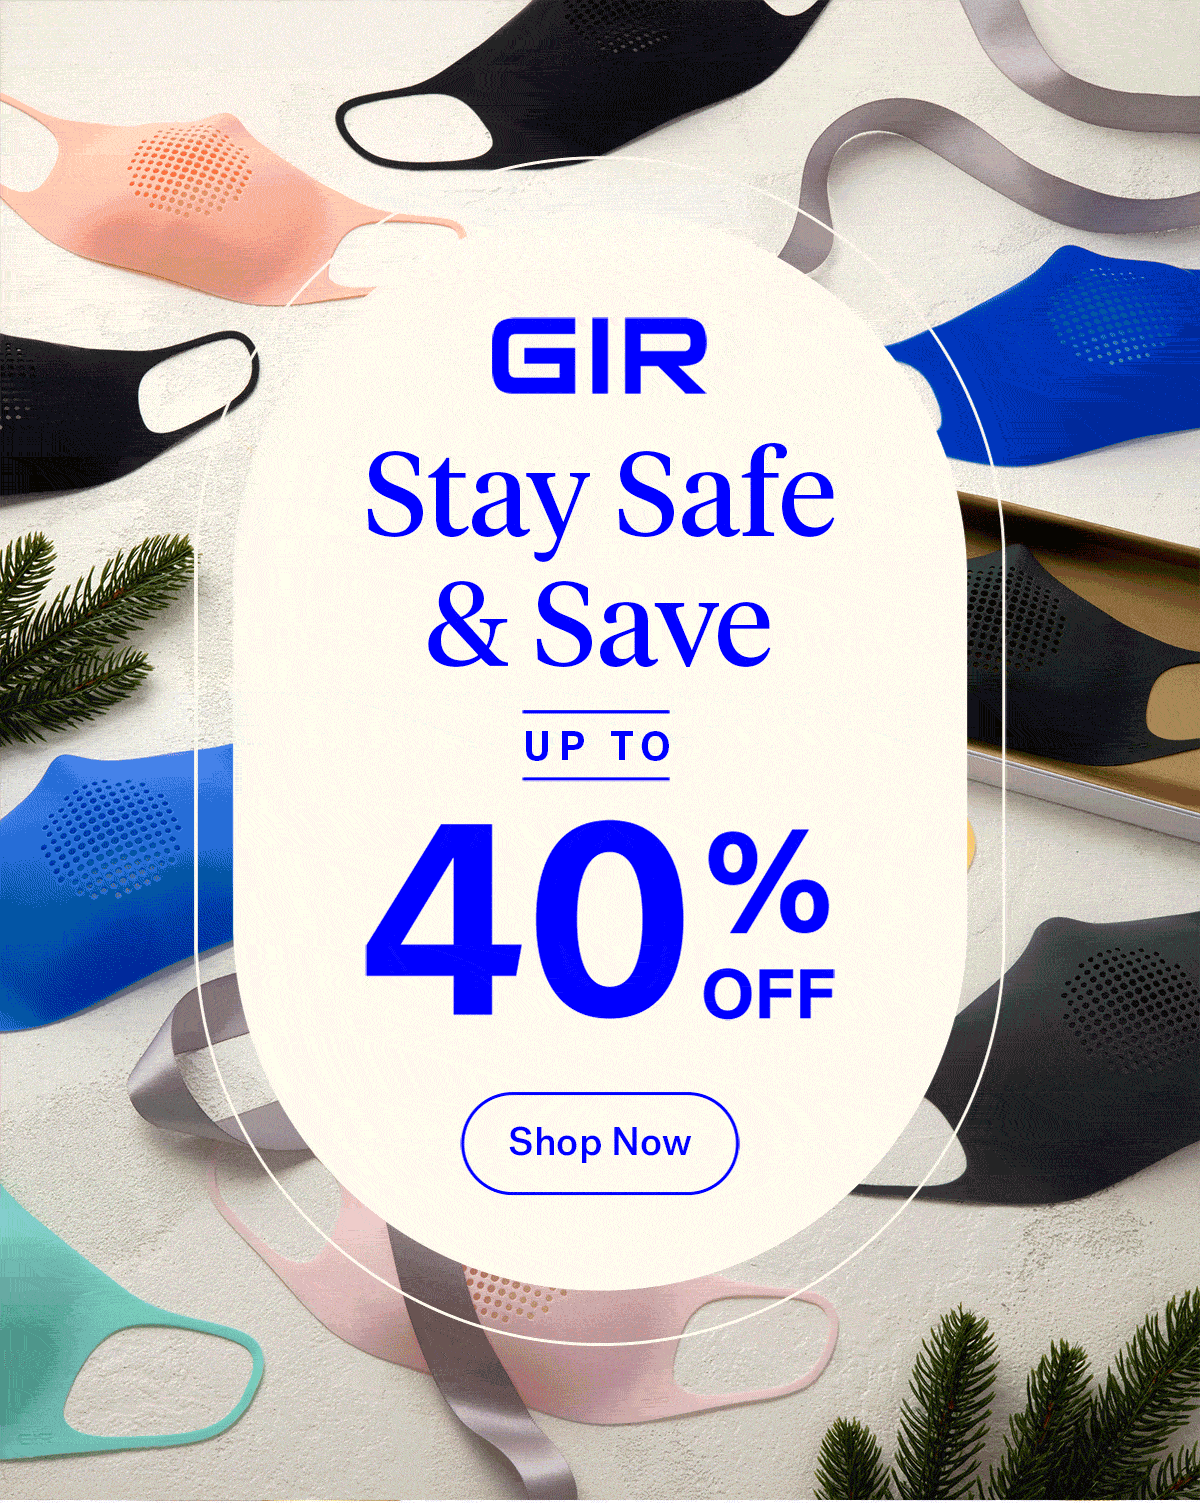 GIR: Get It Right

                                Stay Safe & Save Up To 40% Off

                                Shop Now
                                